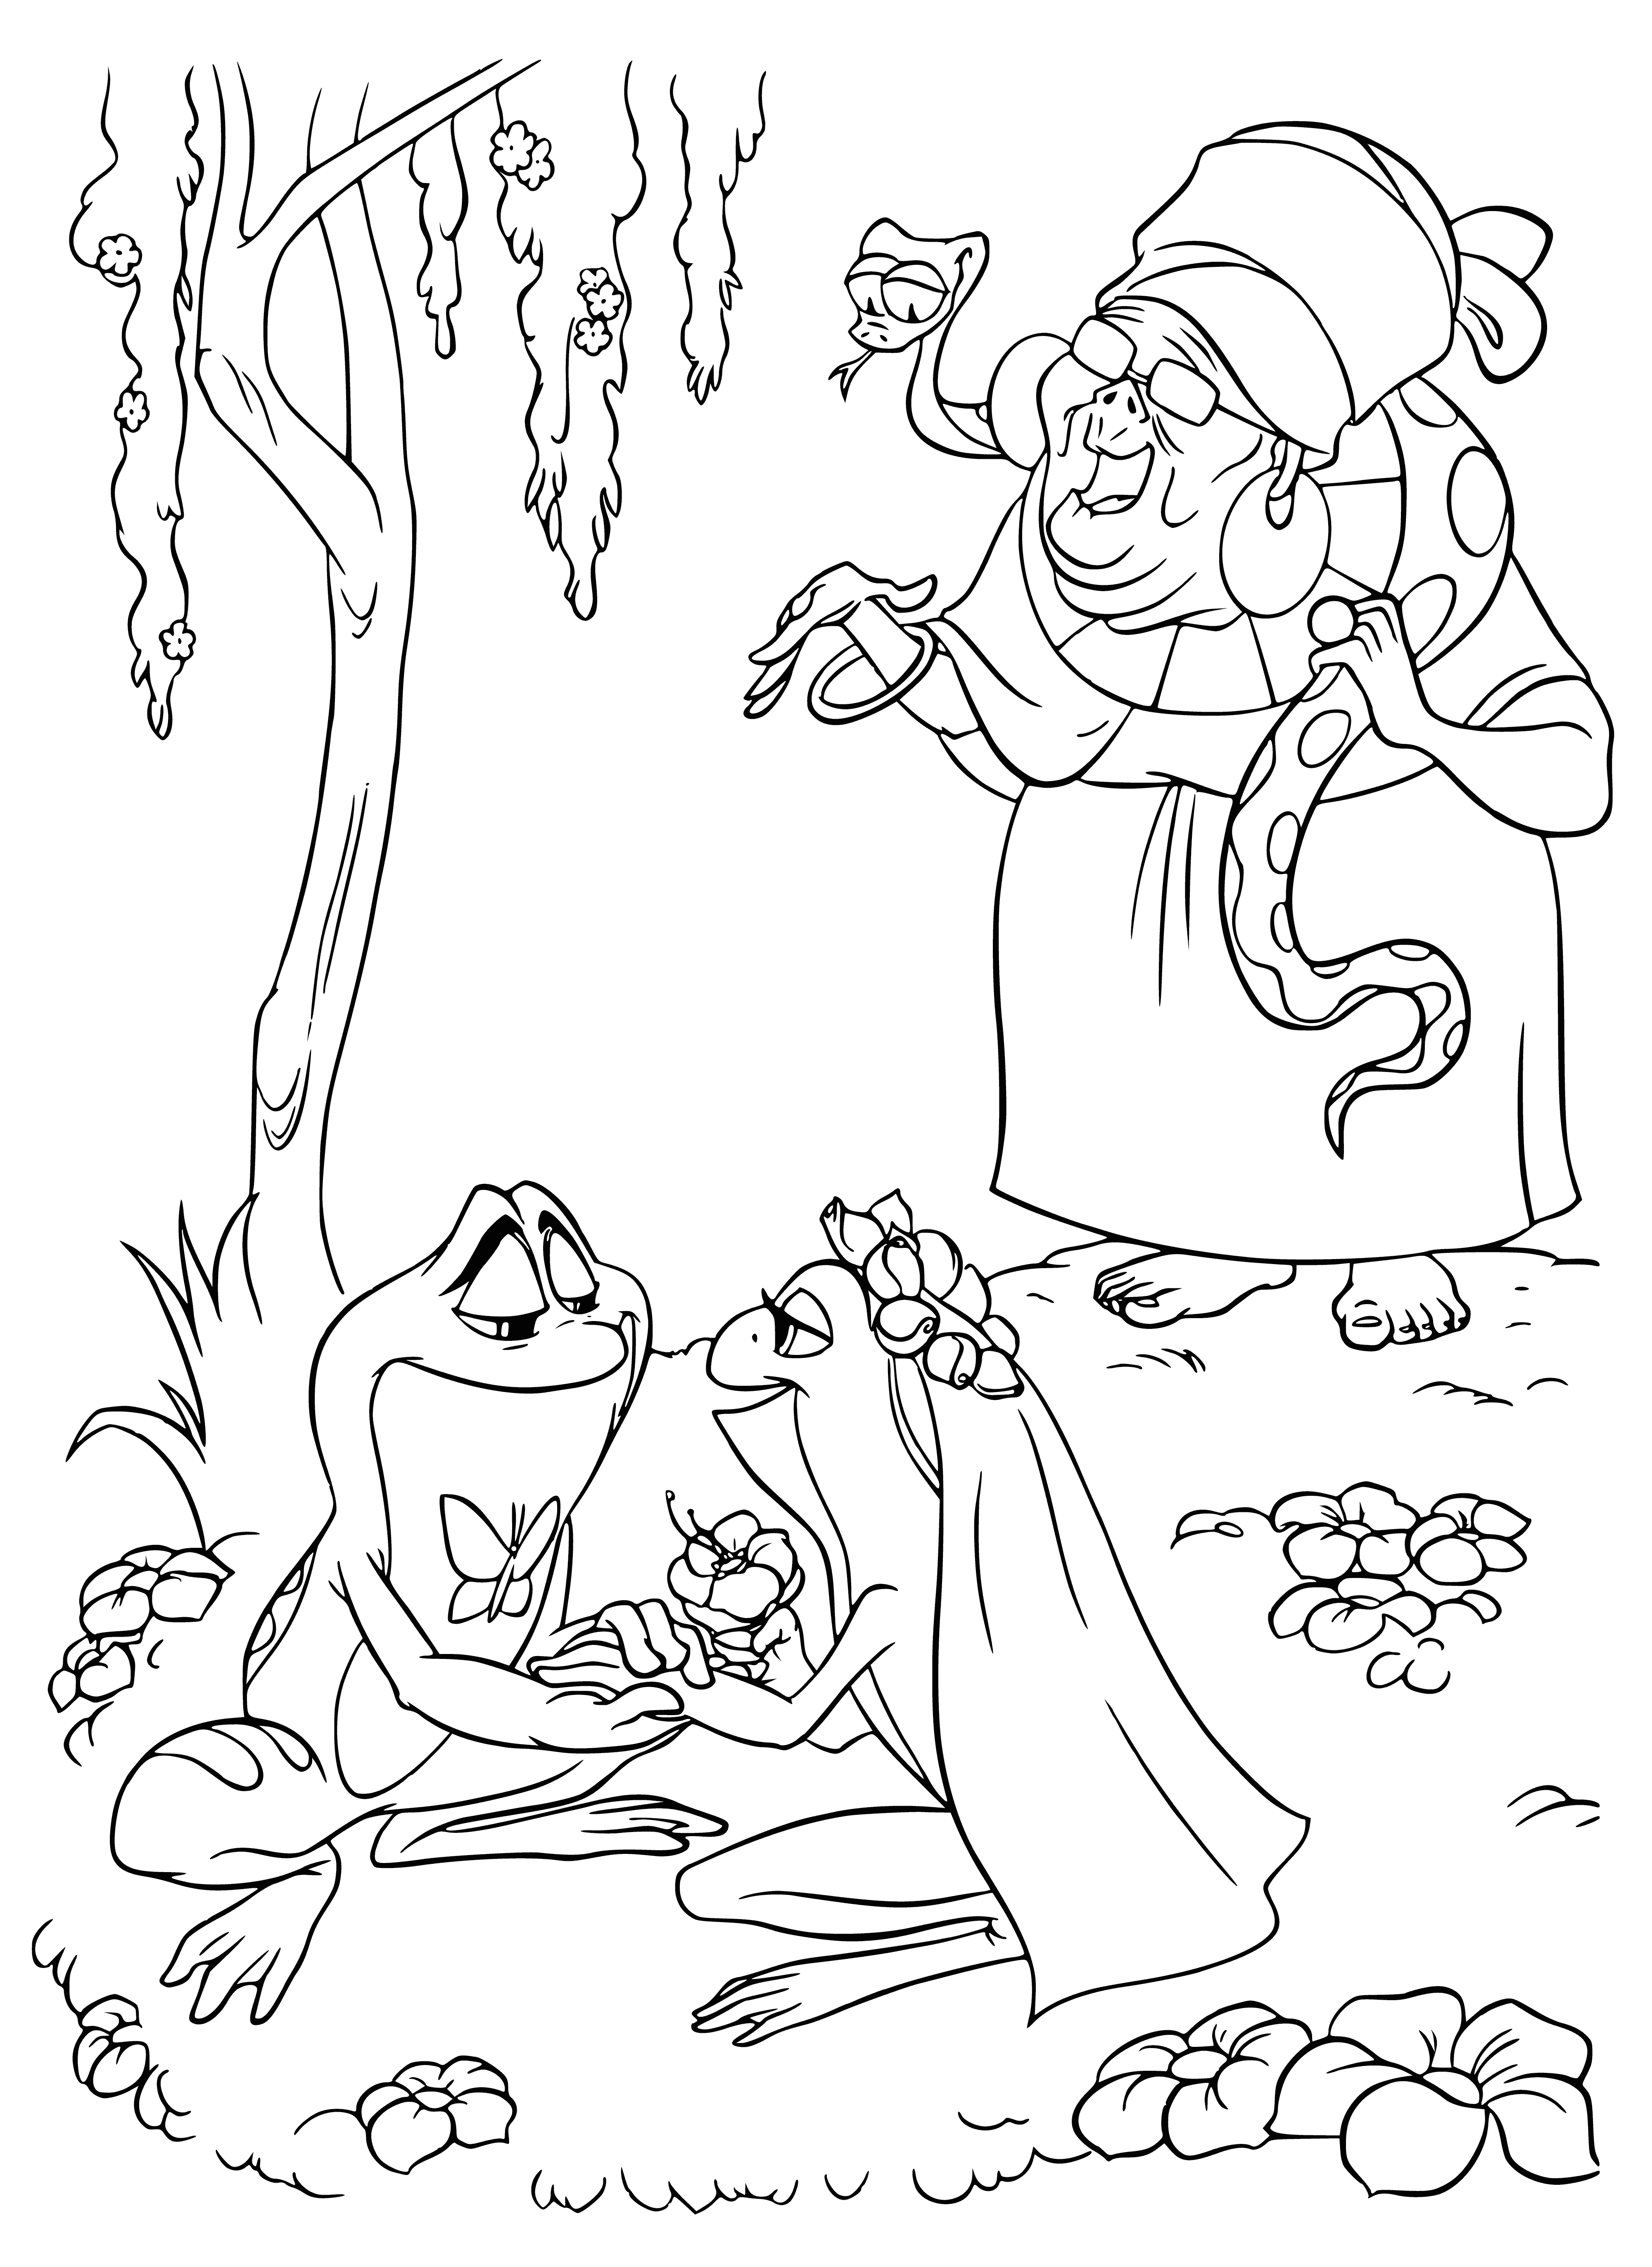 coloring page: Two frogs in crowns embrace on lily pads with other frogs in the background.